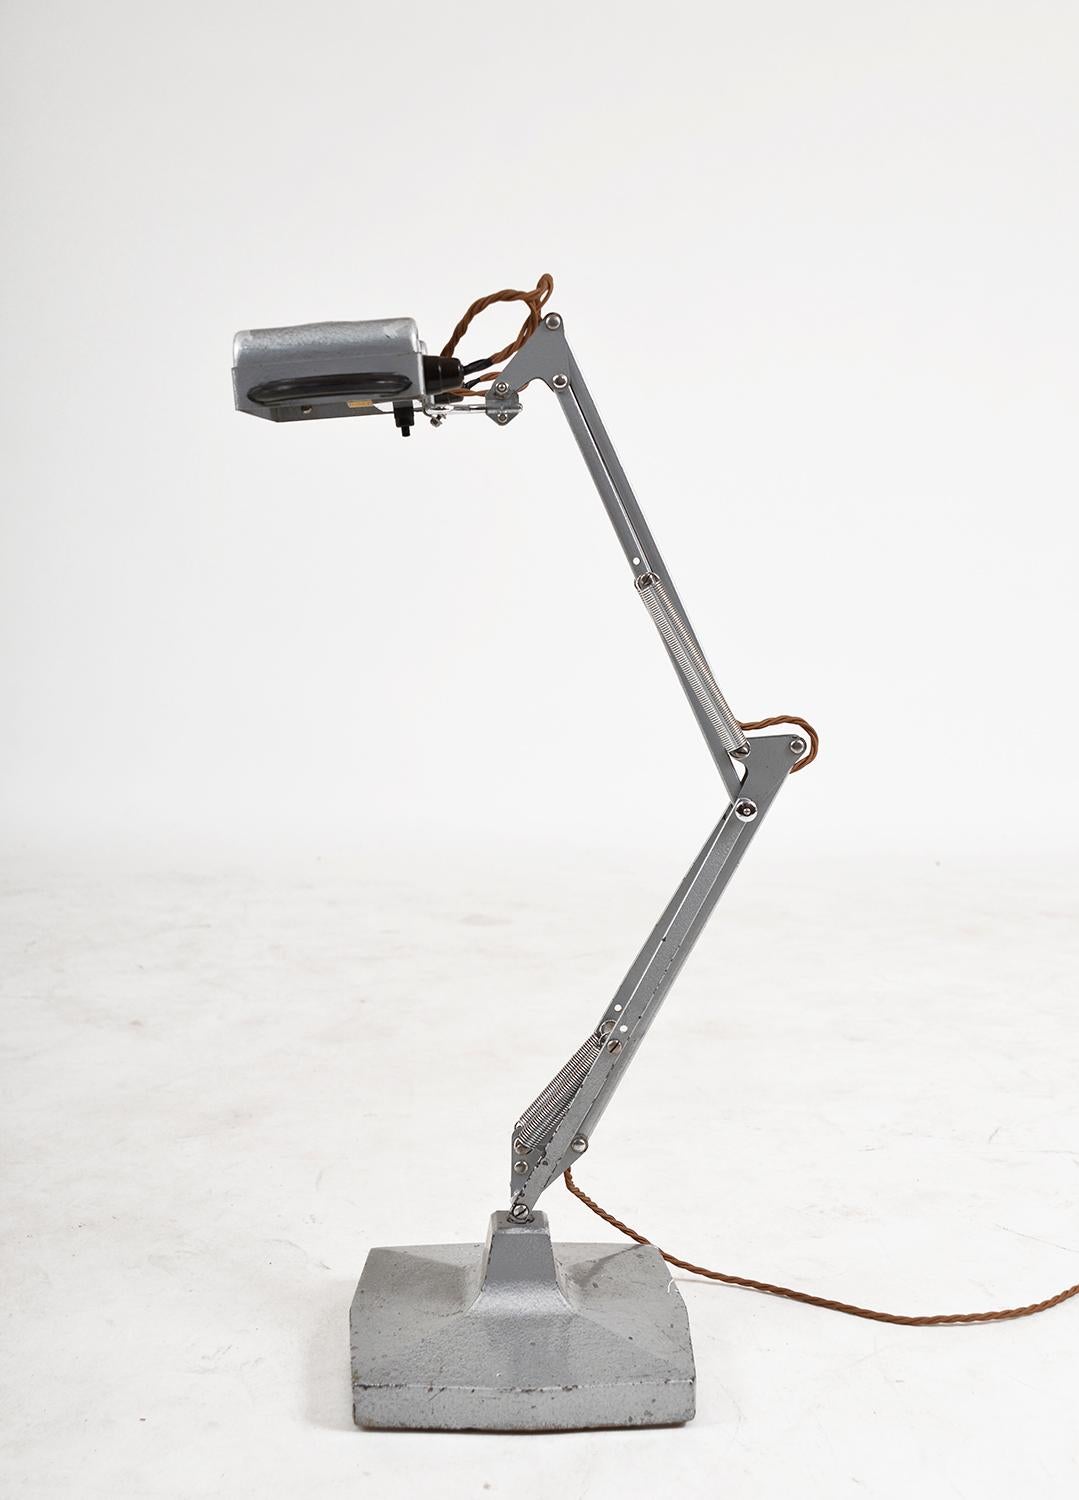 British 1940s Anglepoise Steel Industrial Lamp 1431 by Herbert Terry & Sons Ltd, England